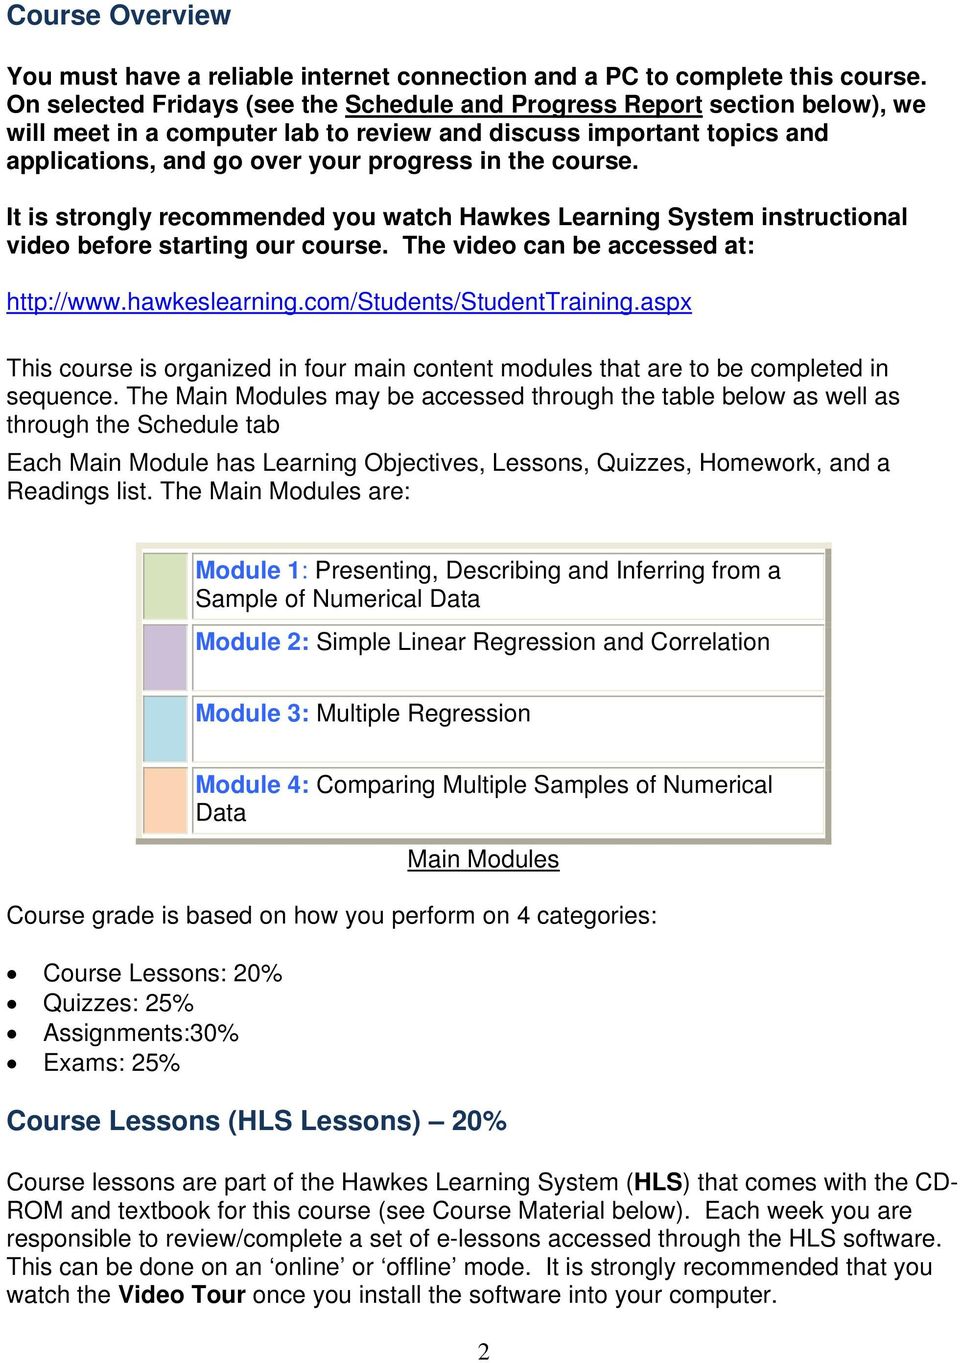 course. It is strongly recommended you watch Hawkes Learning System instructional video before starting our course. The video can be accessed at: http://www.hawkeslearning.